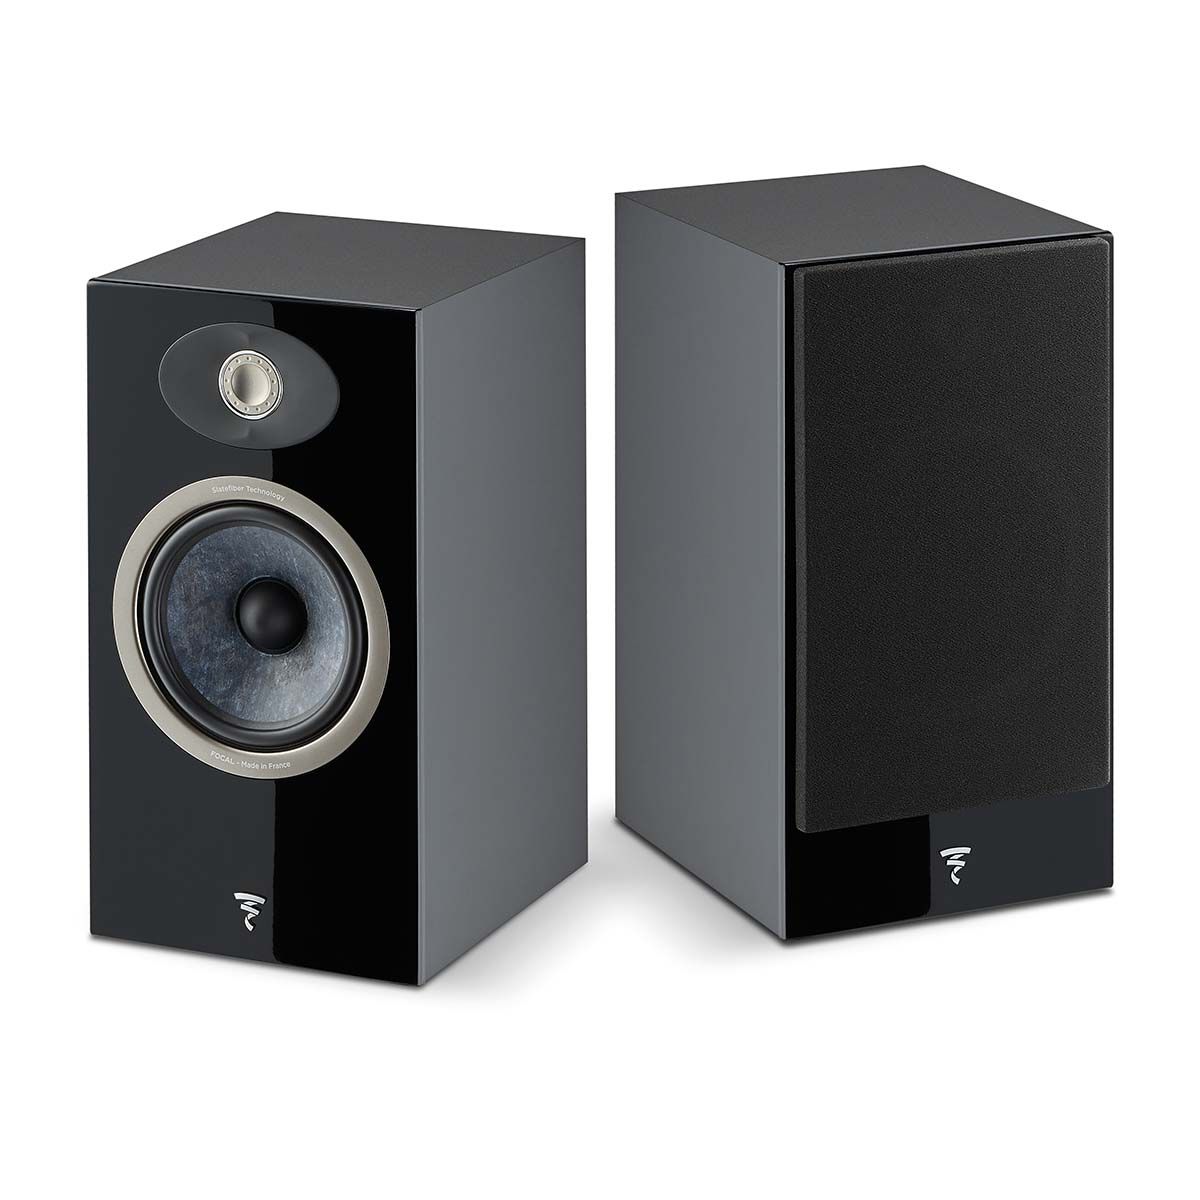 Focal Theva No1 Bookshelf Speakers - Pair - view of black pair, one with grille, one without grille